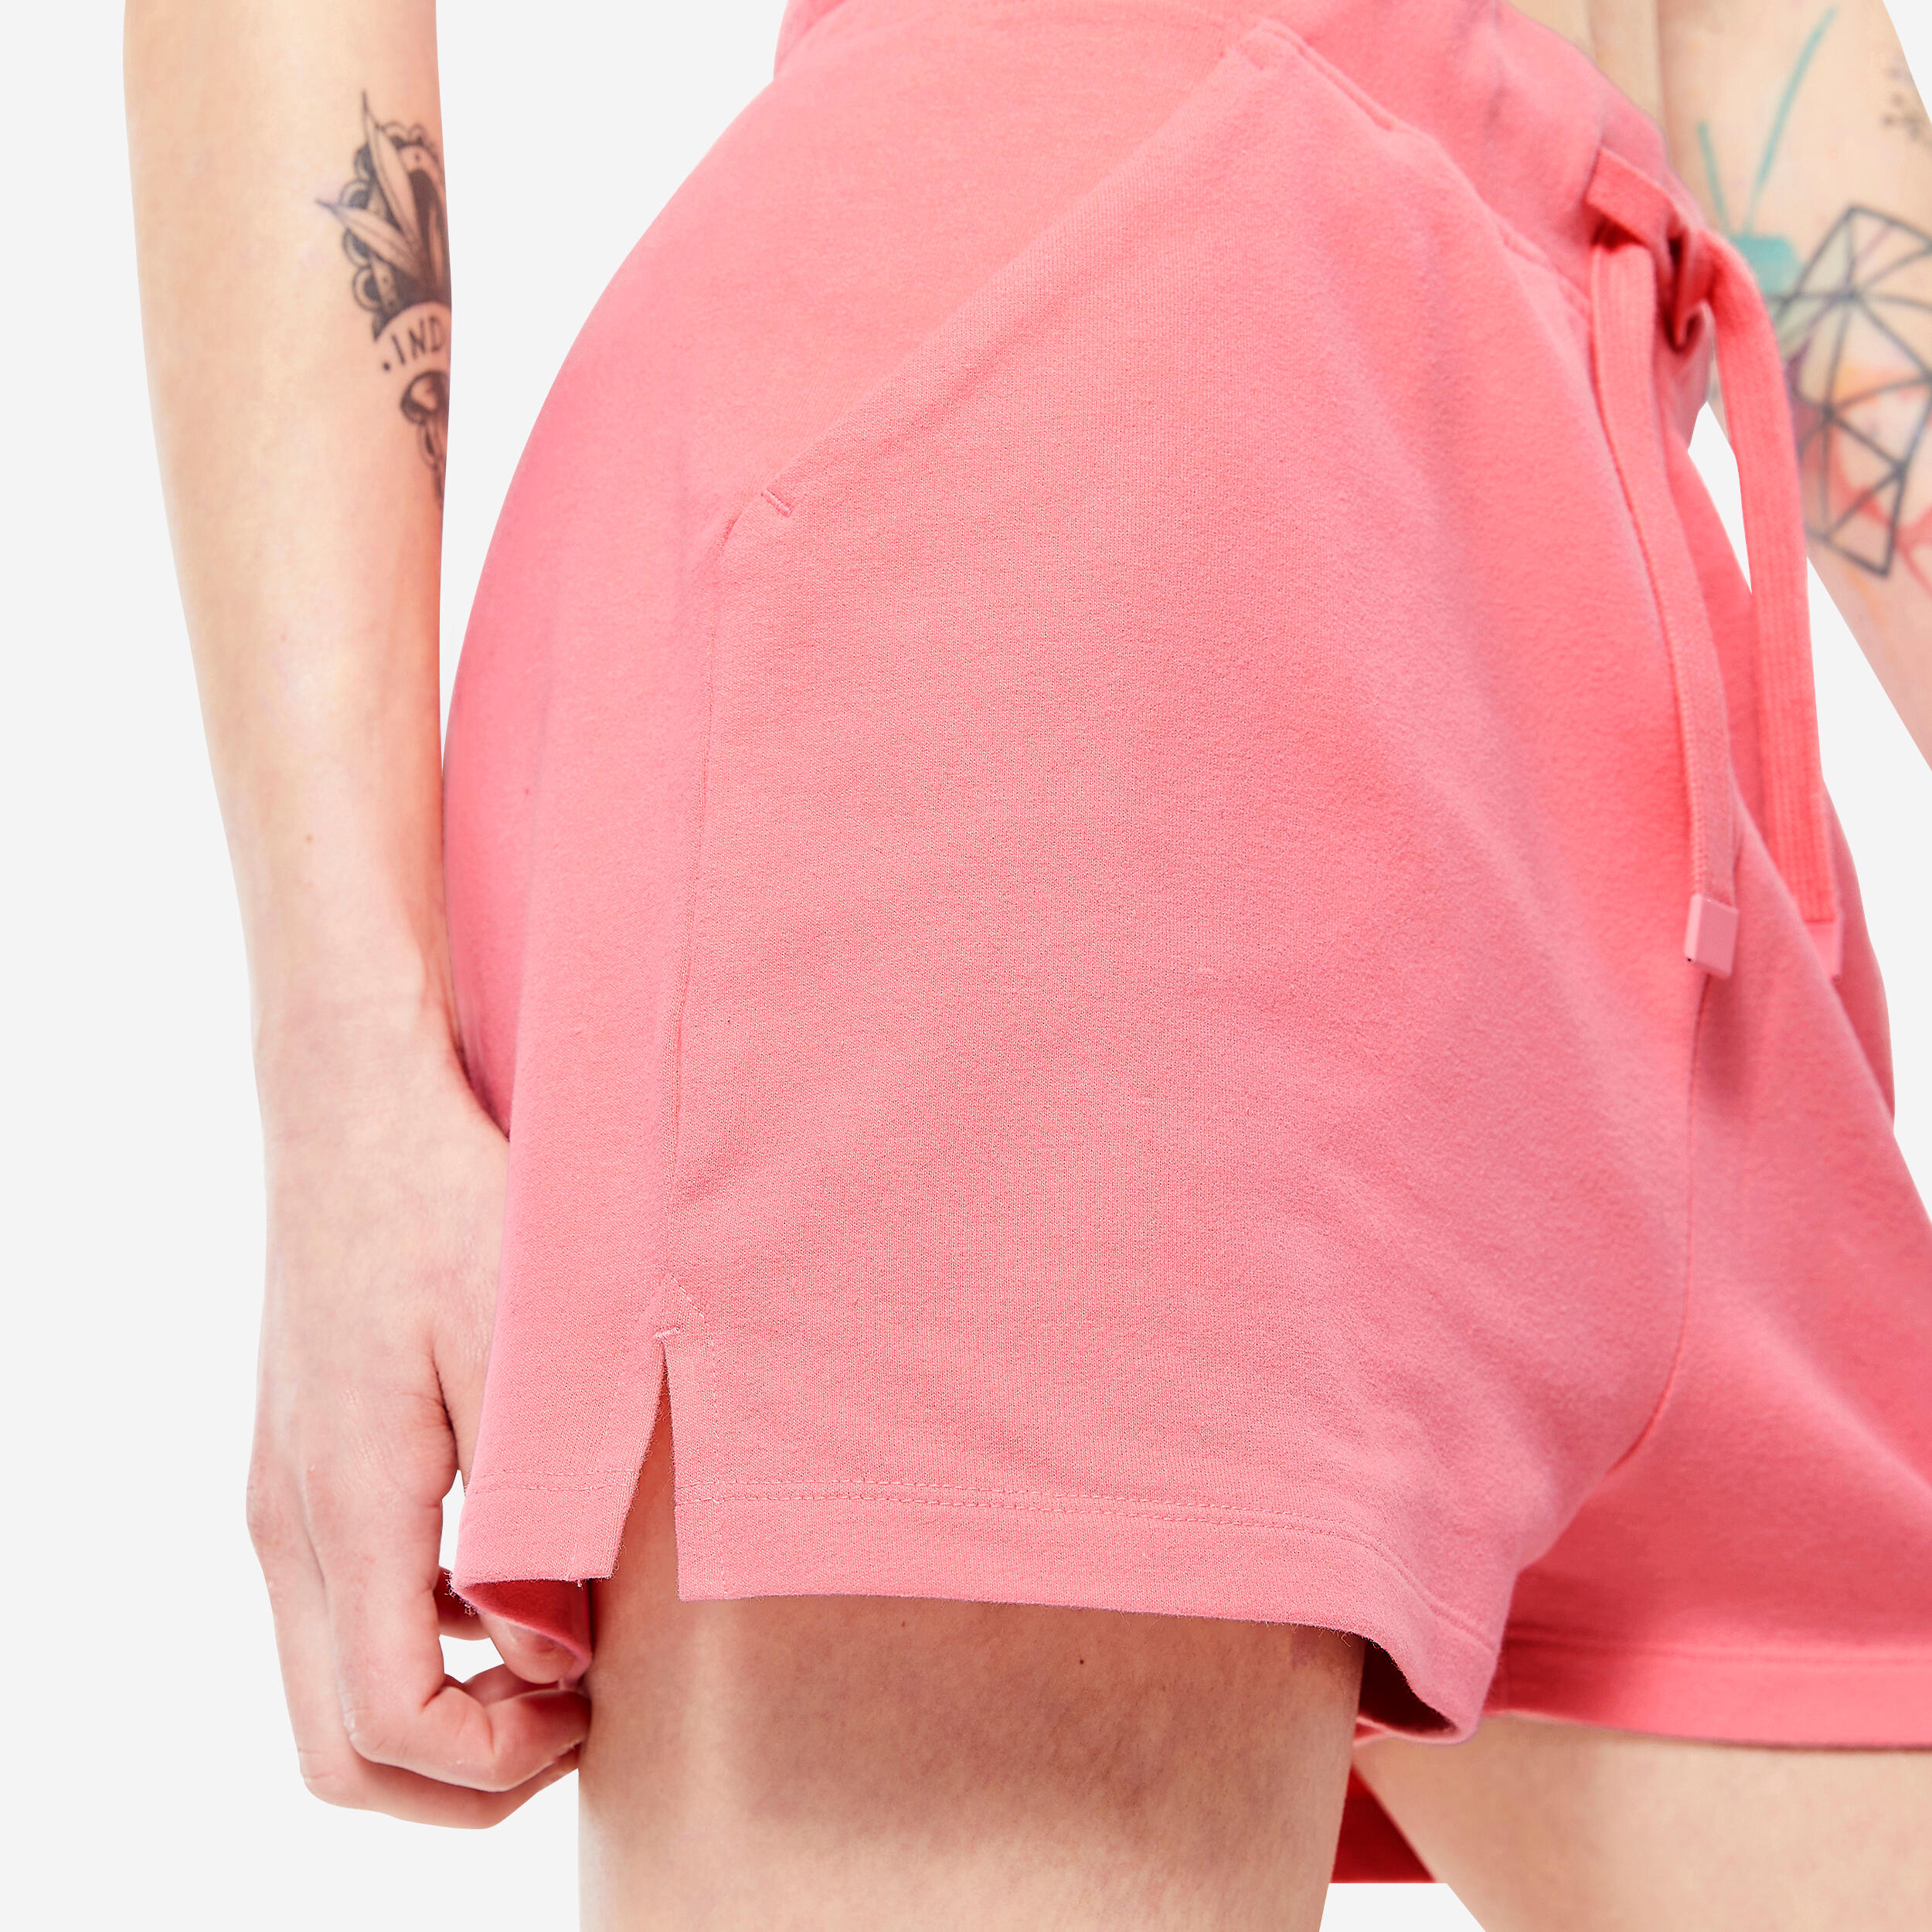 Women's Cotton Fitness Shorts with Pocket 520 - Pink Lychee 6/6